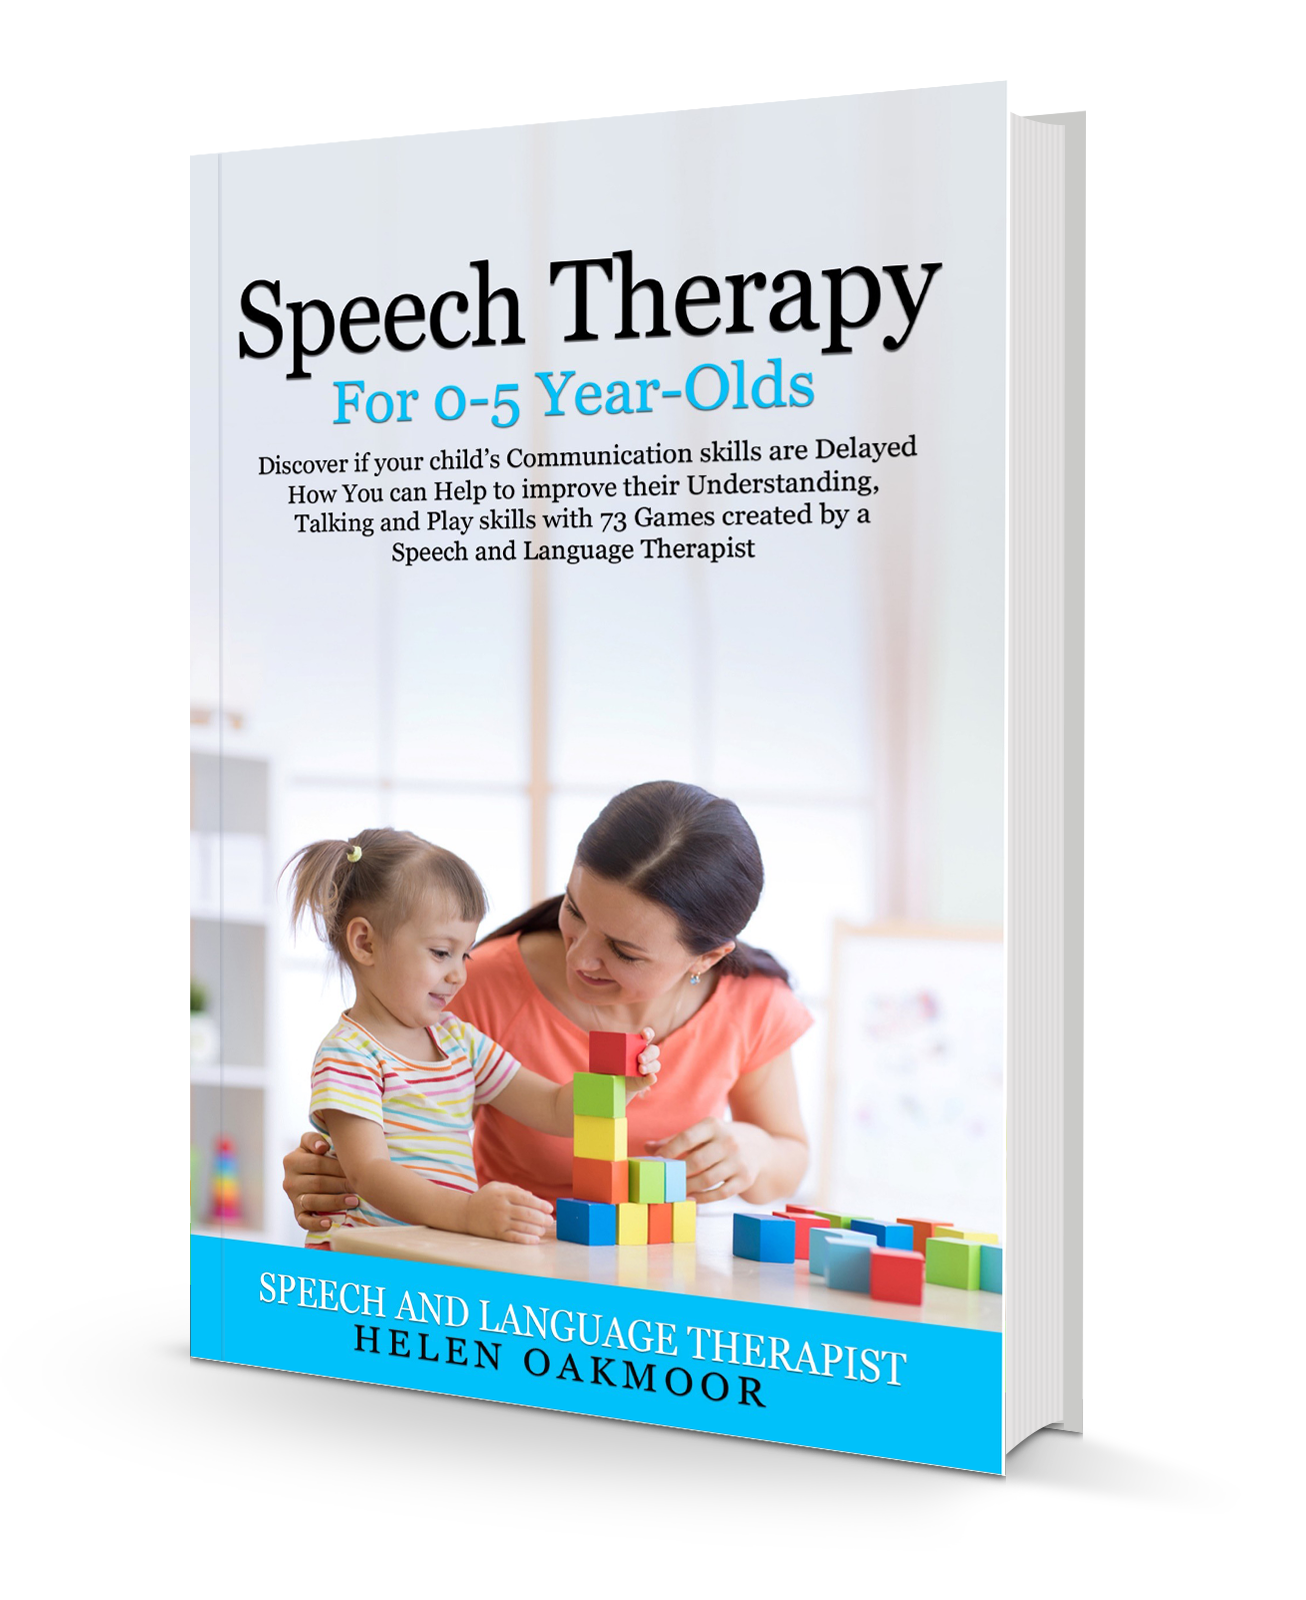 Speech Therapy For 0-5 Year Olds Resources